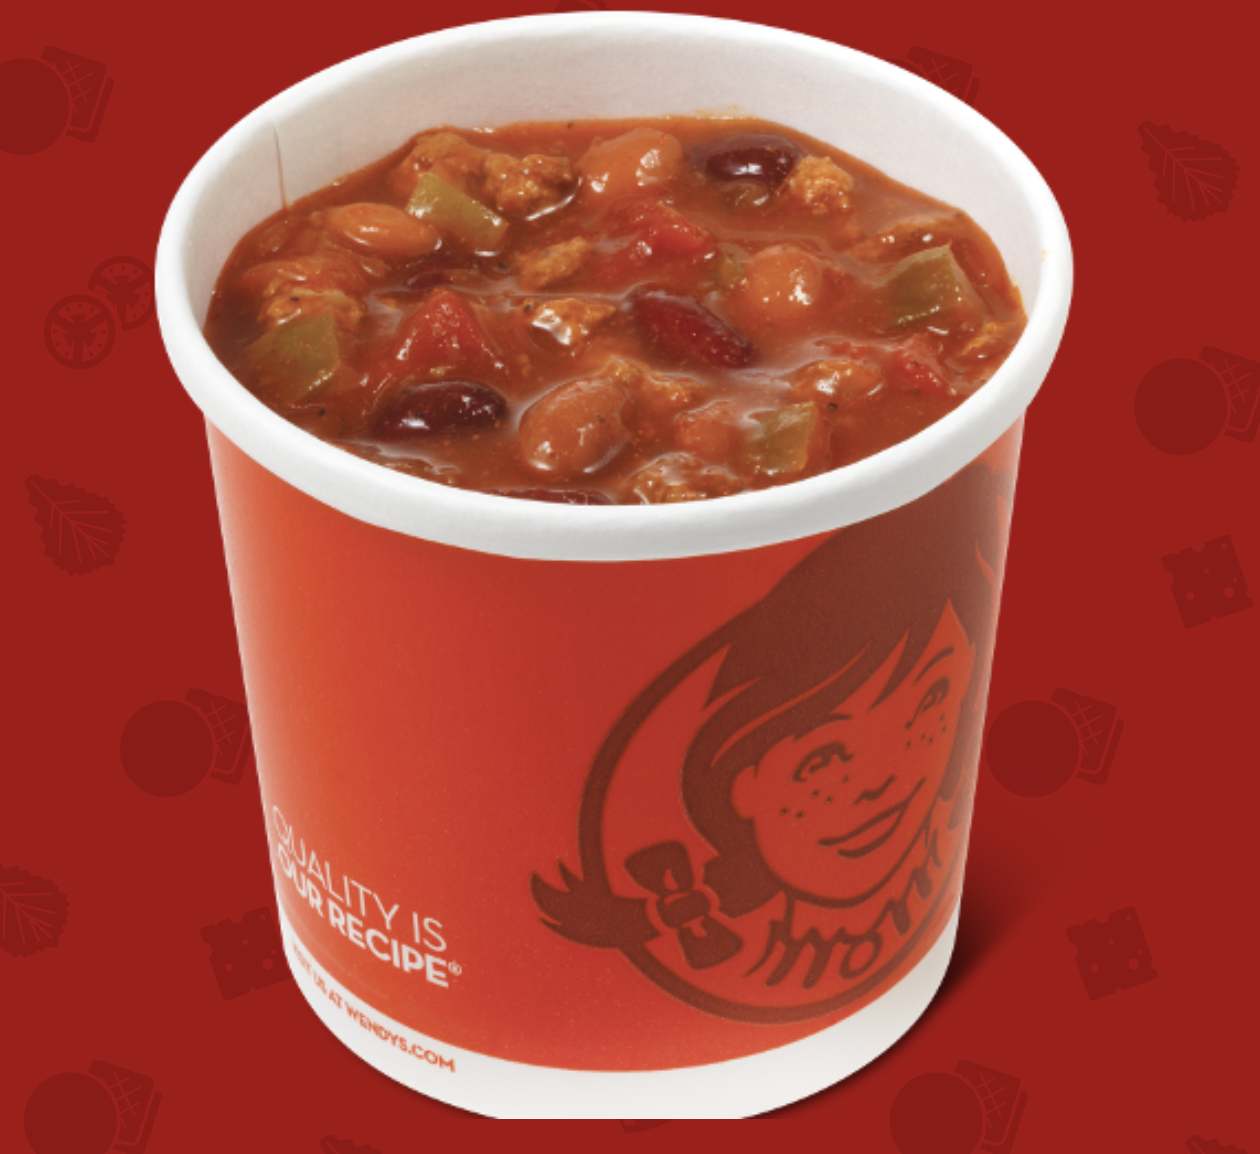 Wendy's: Free Chili with Purchase!